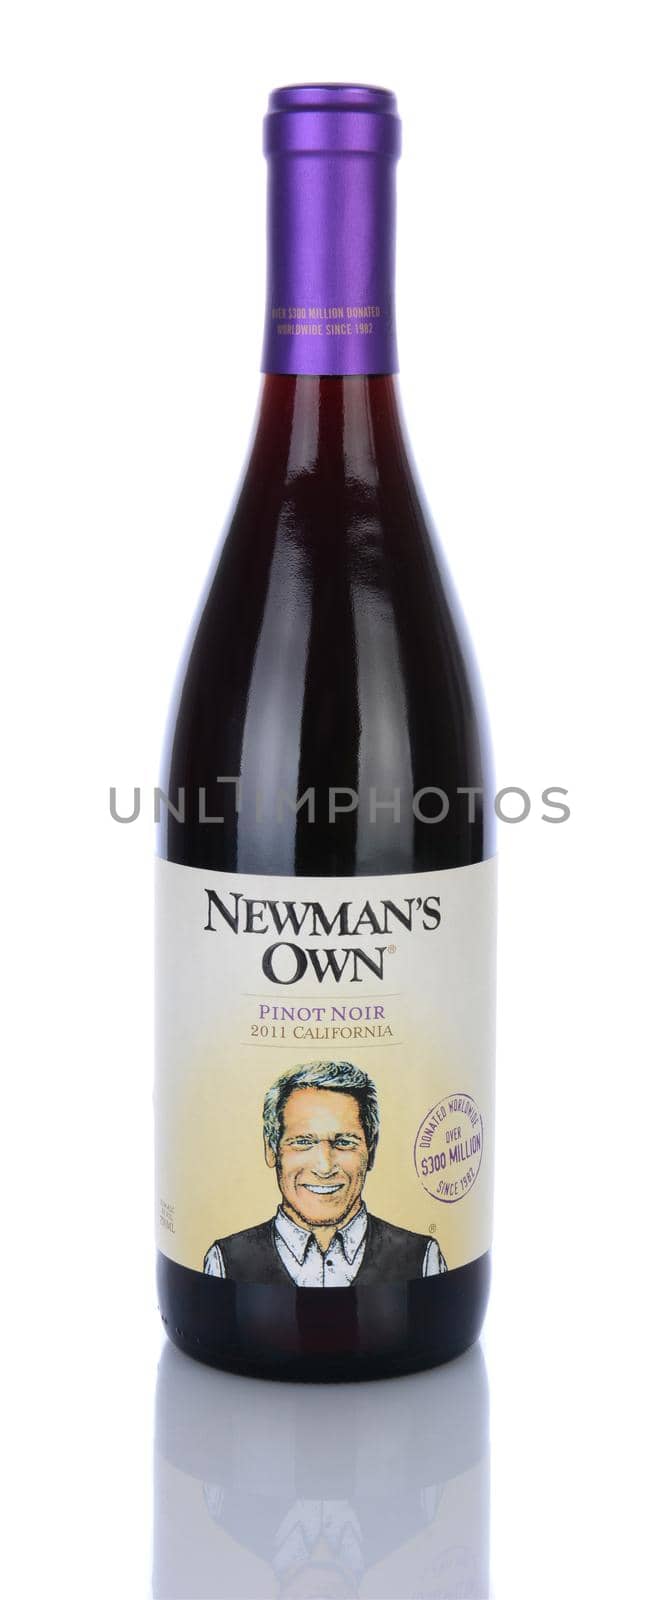 A Bottle of Newmans Own Pinot Noir by sCukrov